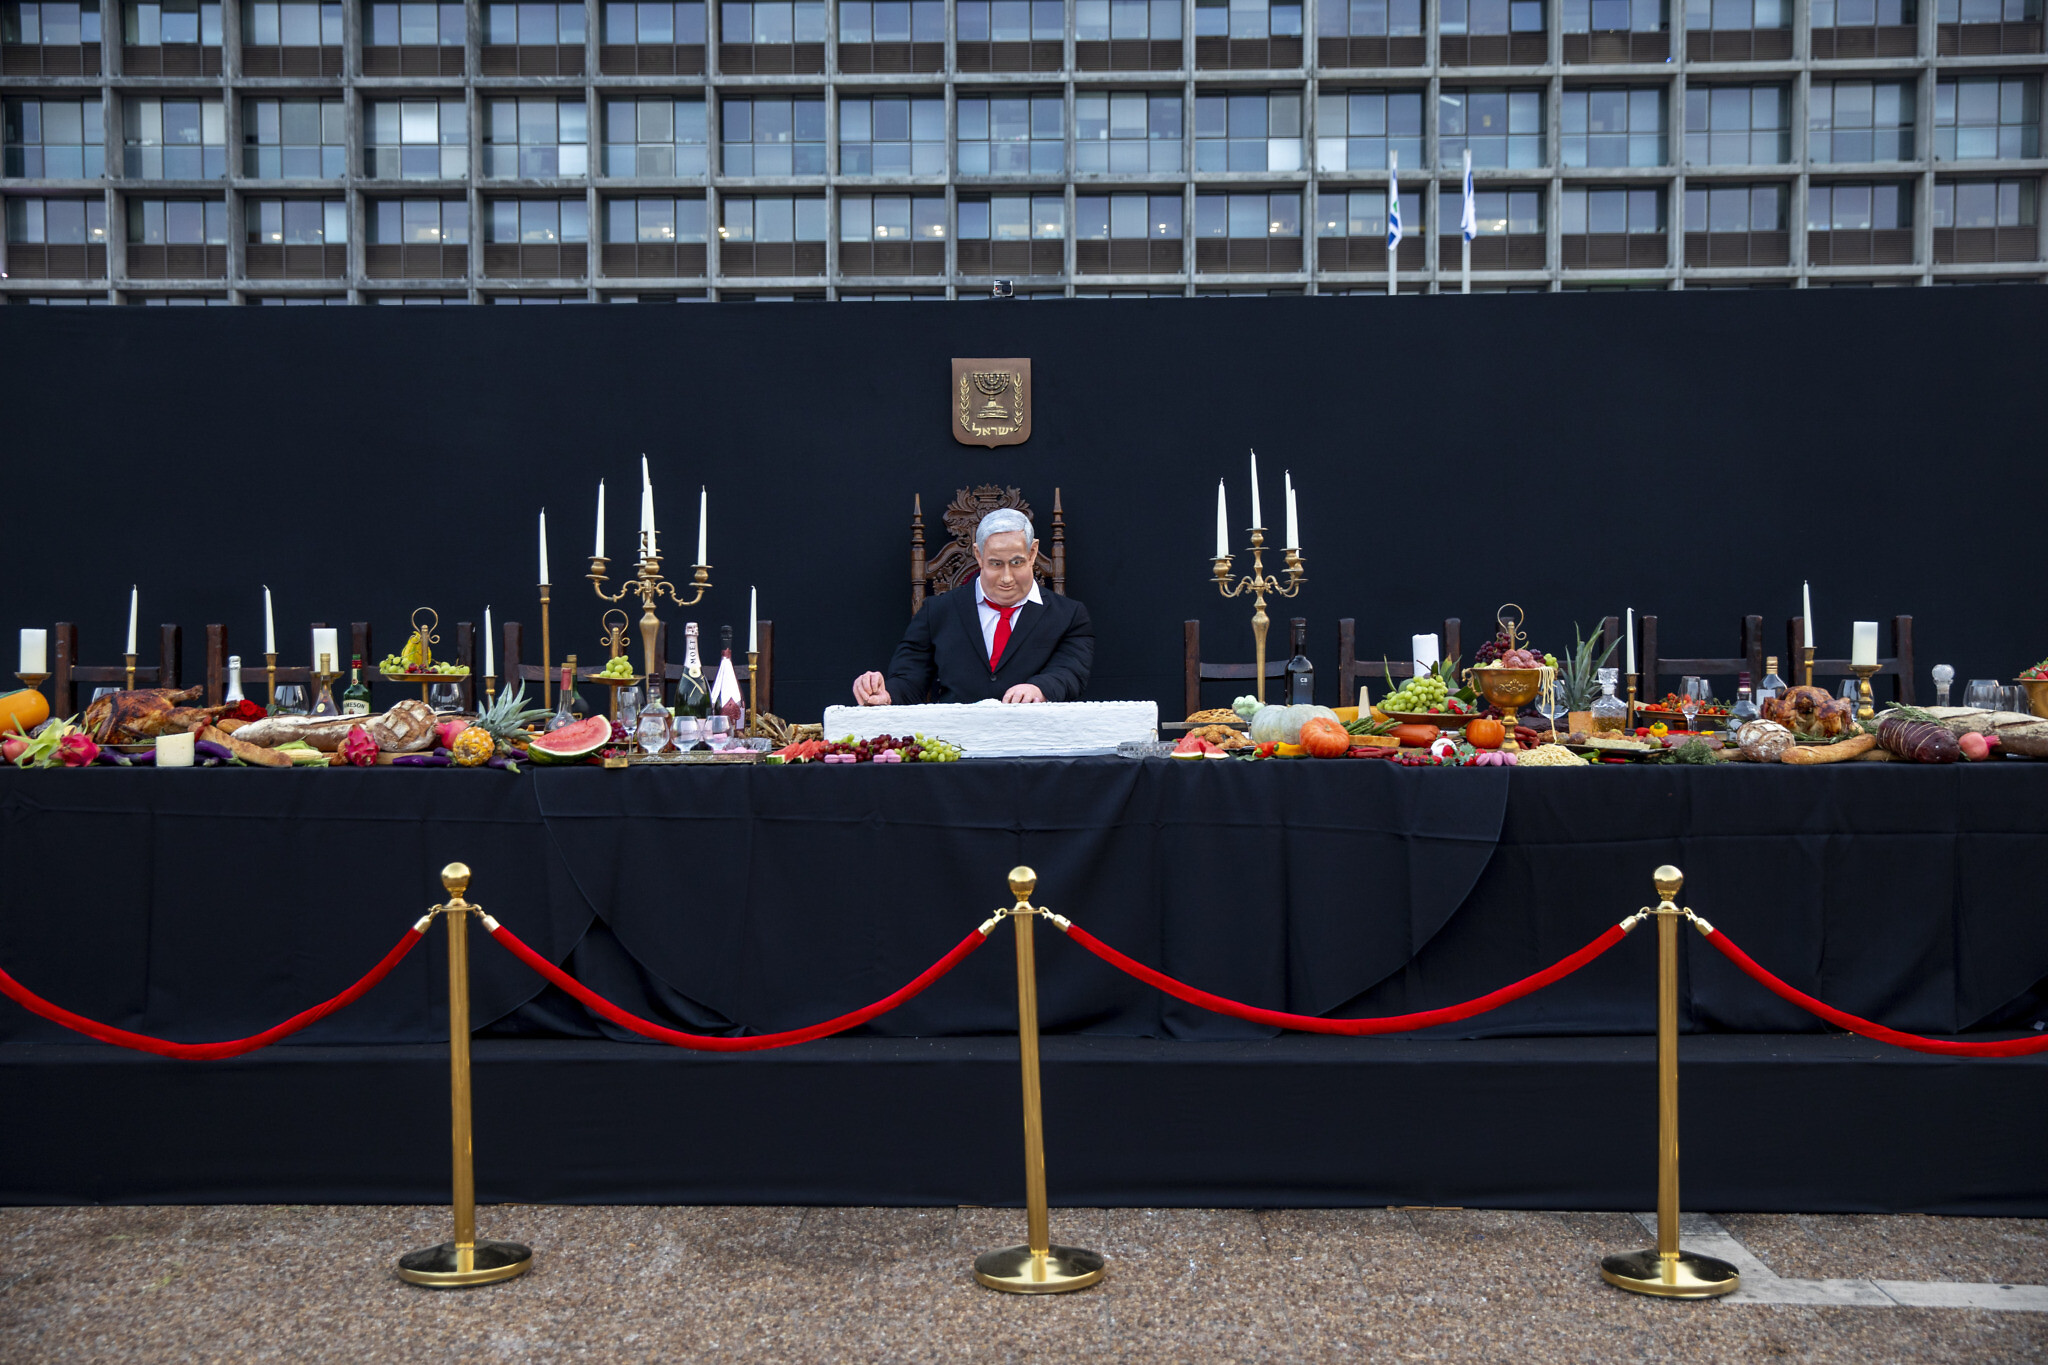 Artist takes aim at Netanyahu with life-size Last Supper statue ...